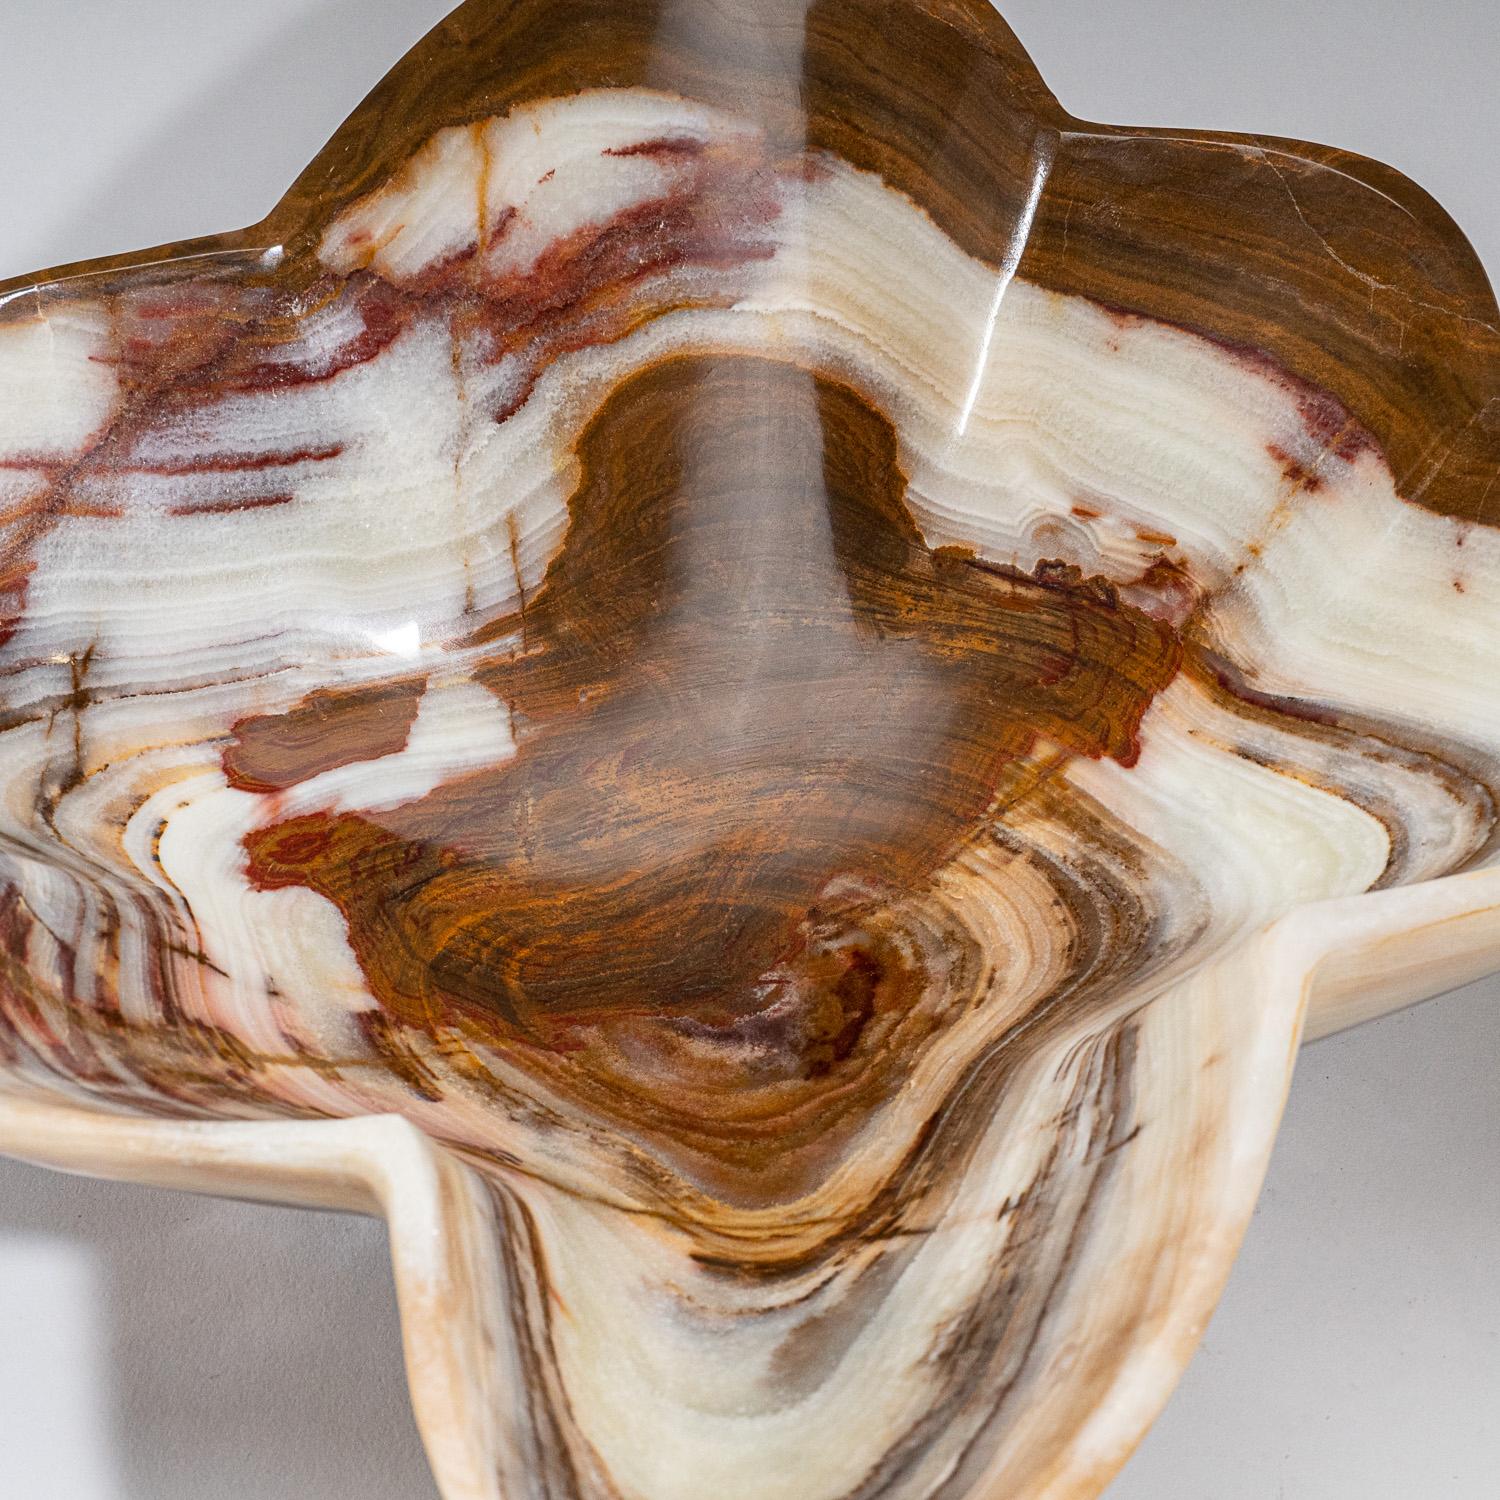 One-of-a-kind, solid mid sized free-form natural onyx decorative bowl carved out of a single chunk of banded natural onyx. This incredible piece is polished to a mirror finish. This unique piece blends natural onyx shades of white, honey and brown